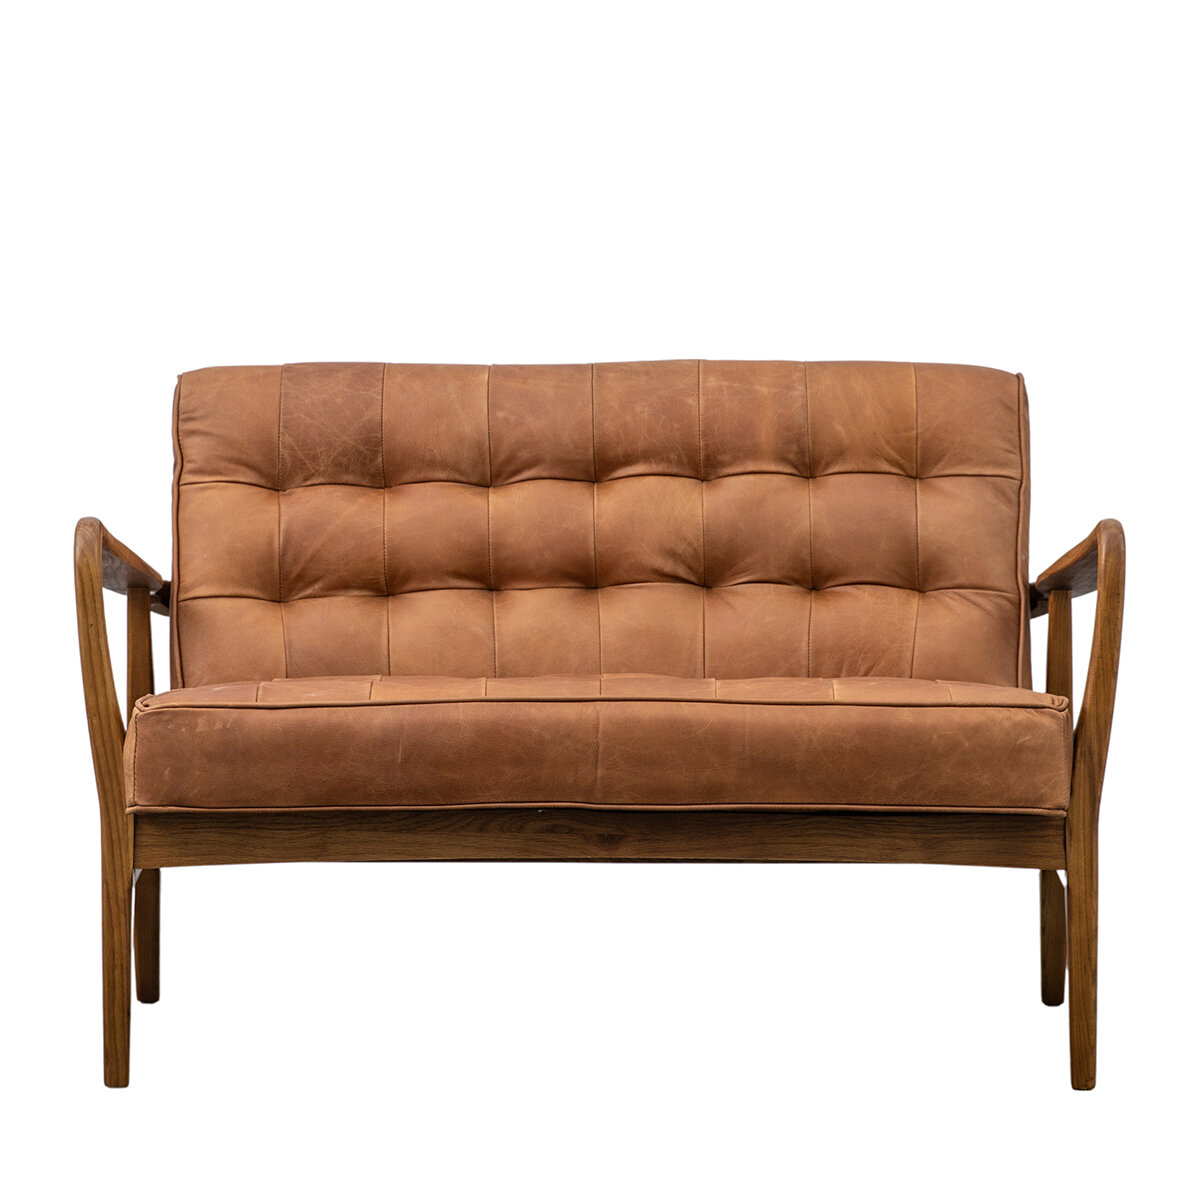 Gallery Humber Brown Leather 2 Seater Sofa